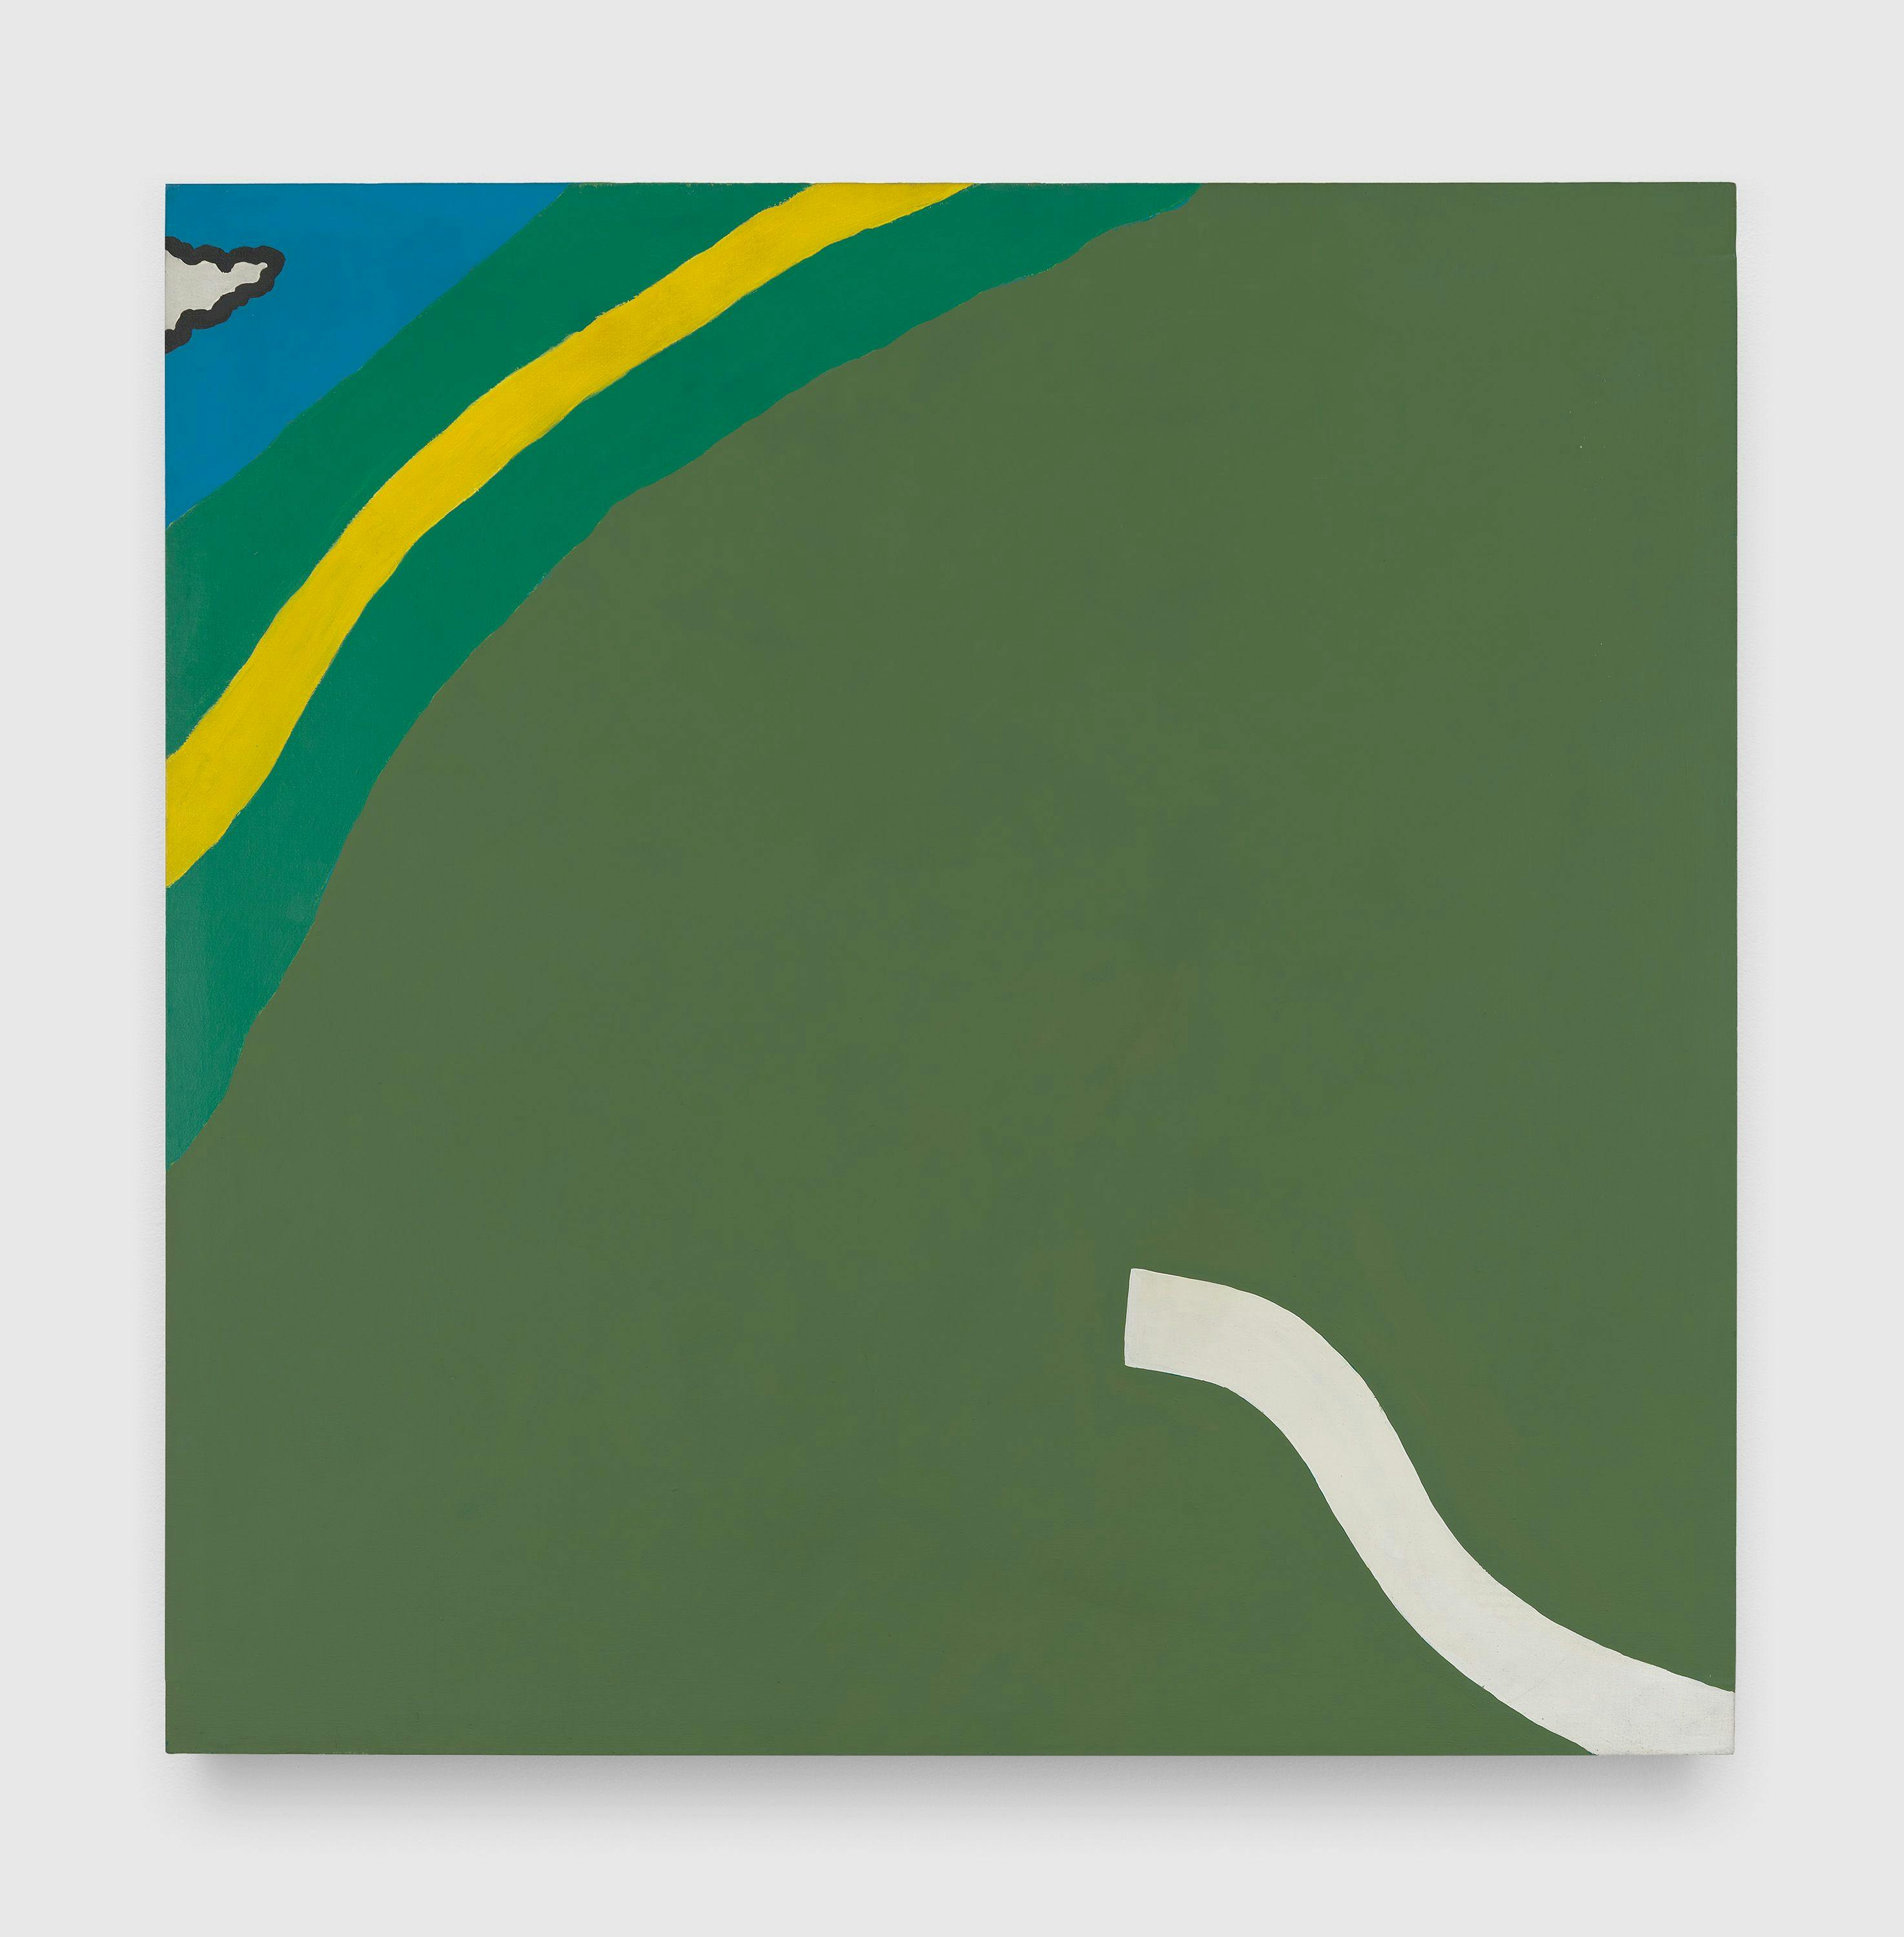 A painting by Raoul De Keyser, titled Languit in Het Gras, dated 1968.